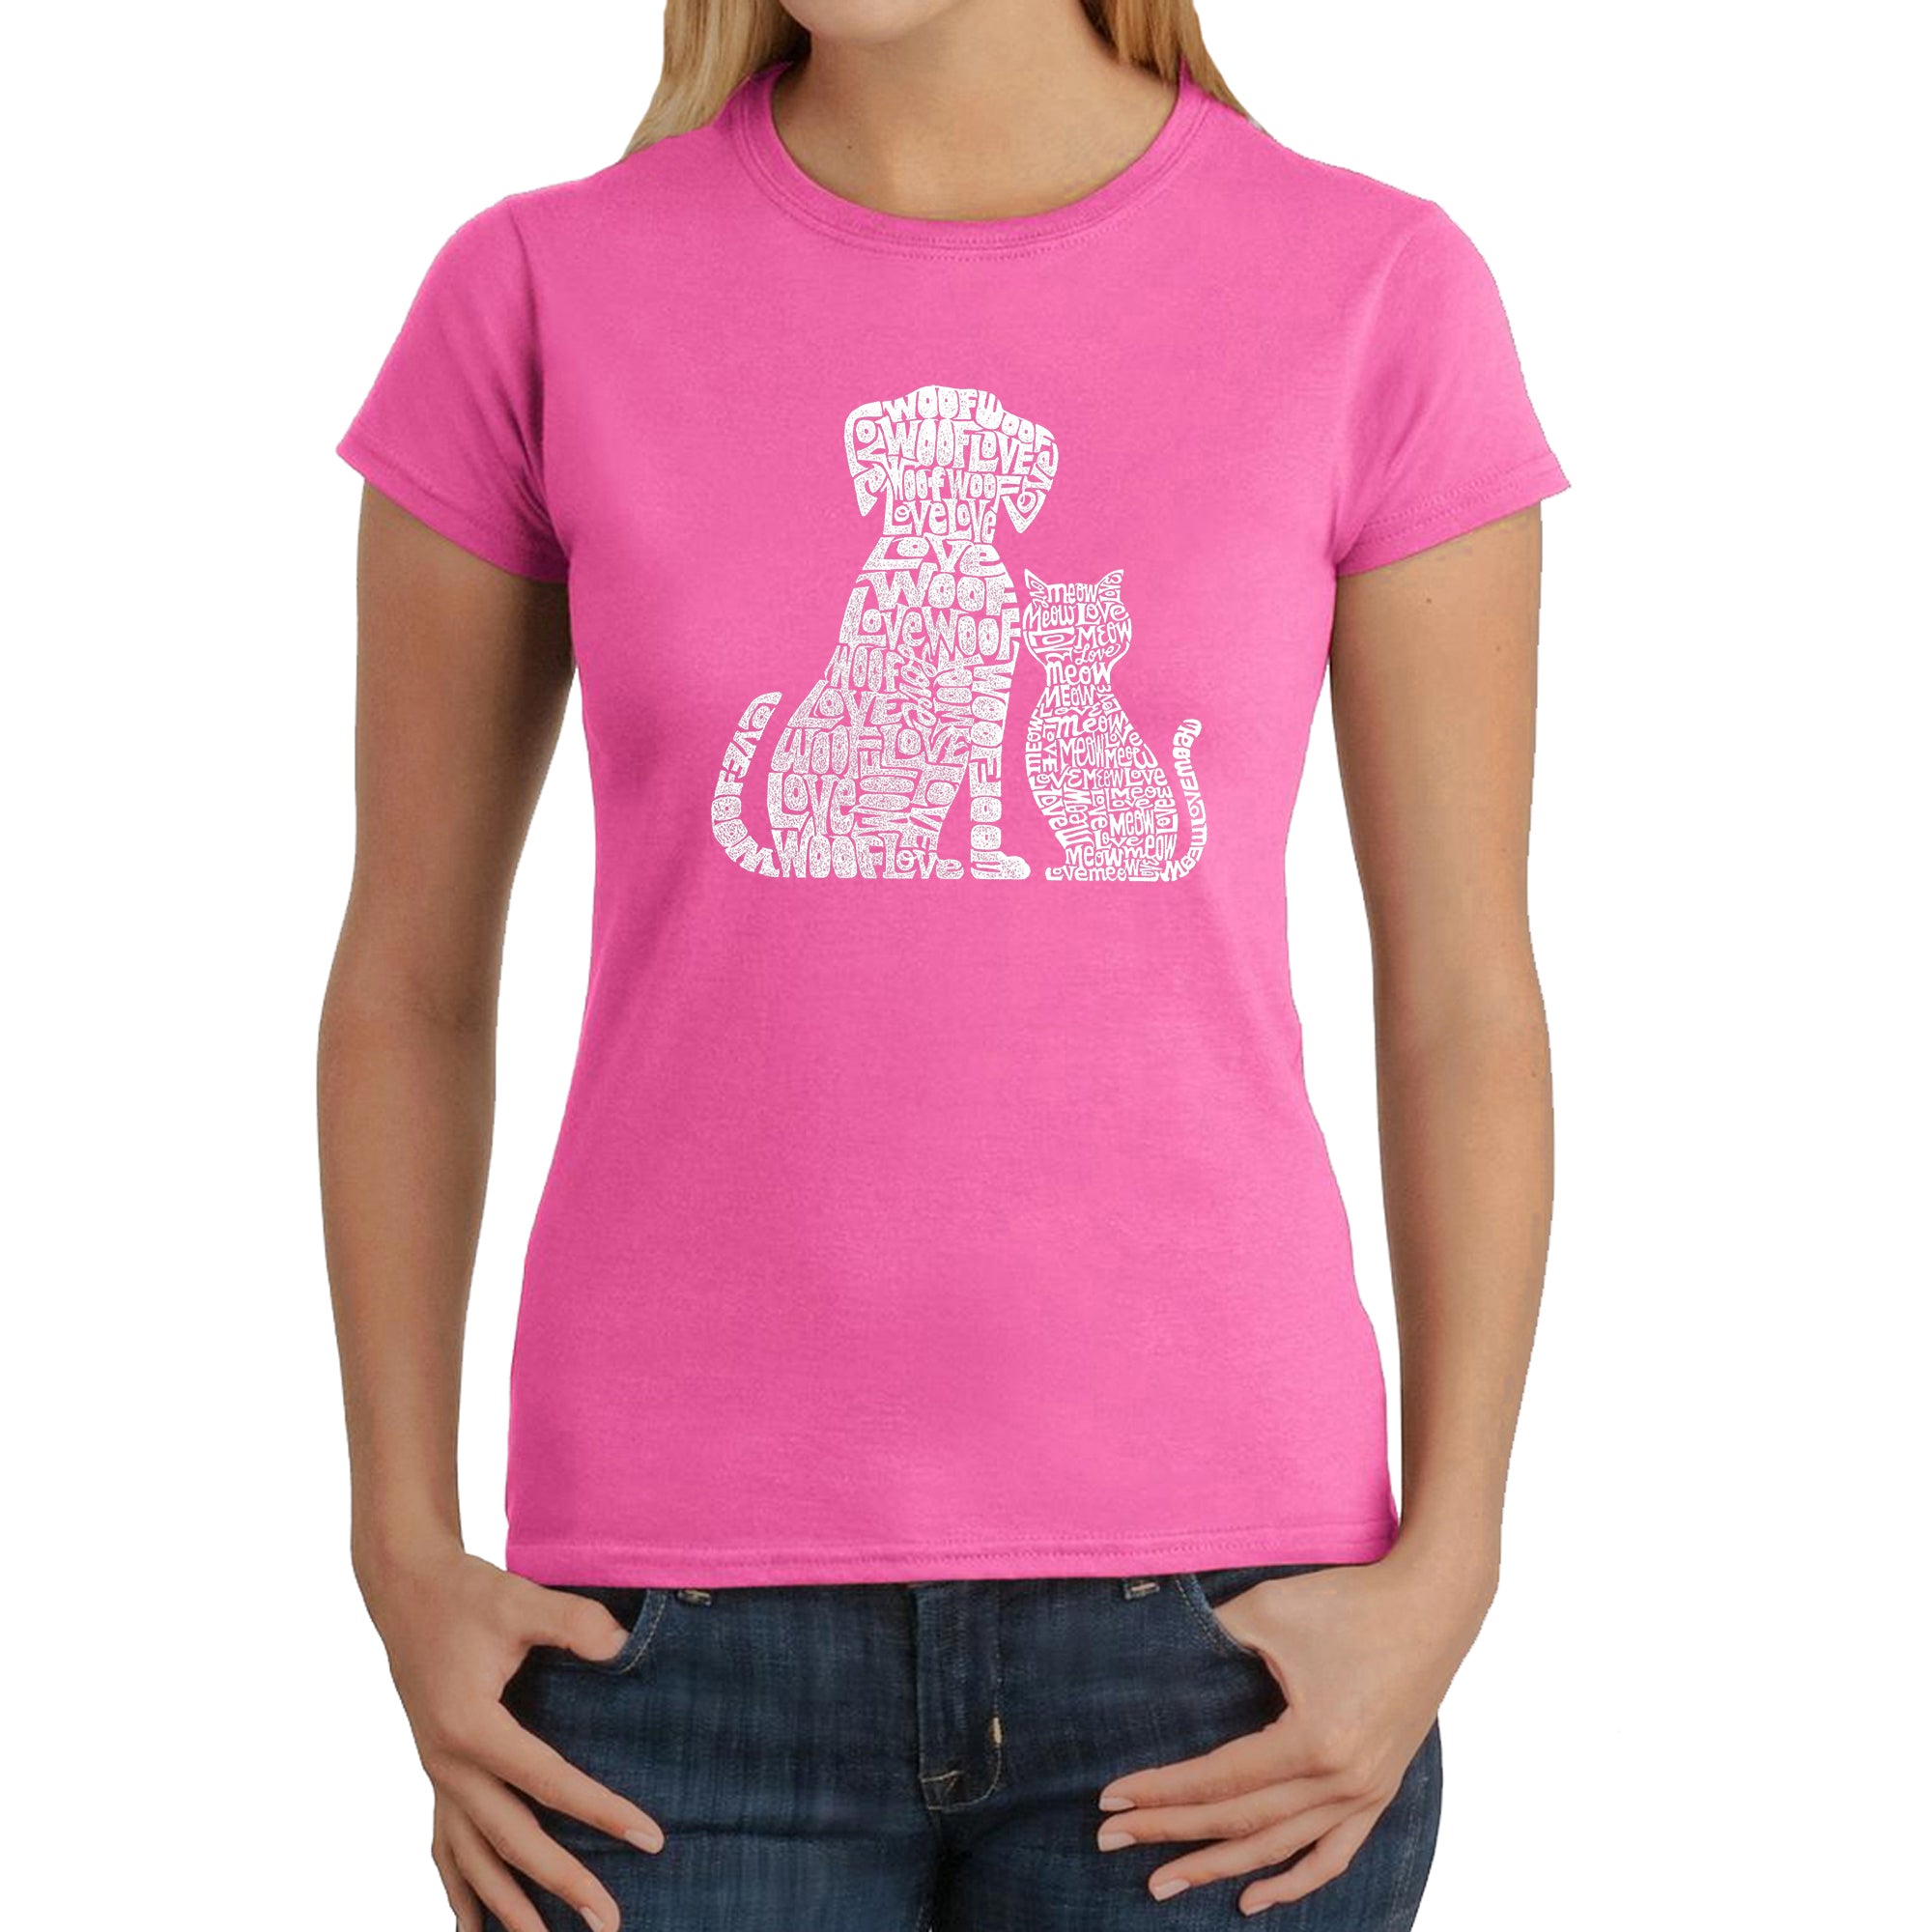 Dogs And Cats - Women's Word Art T-Shirt - Pink - Large